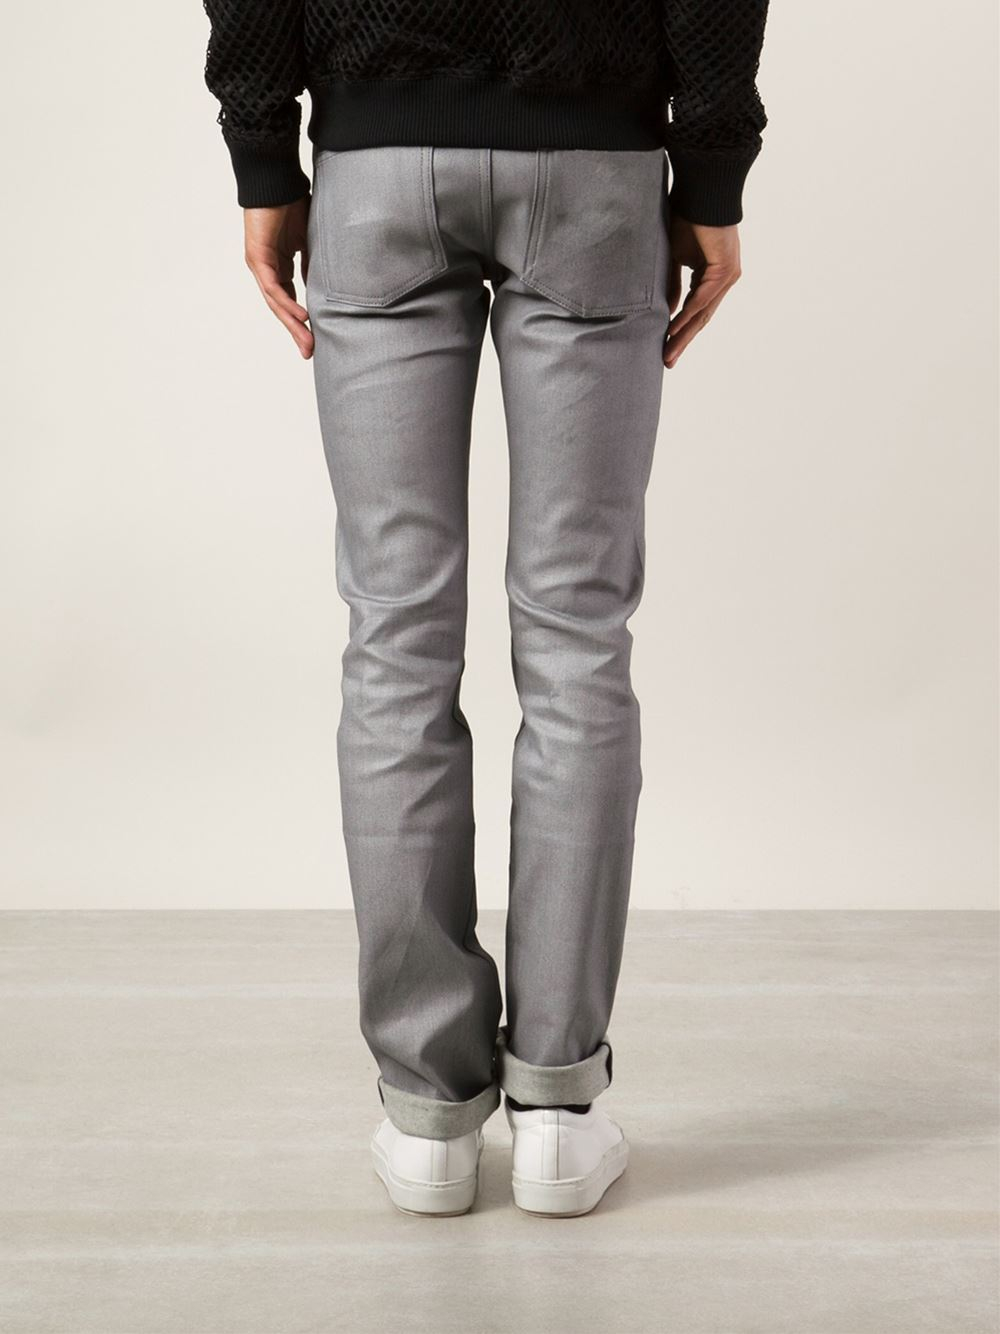 Naked & Famous Denim Skinny Stretch Jeans in Heather Grey 